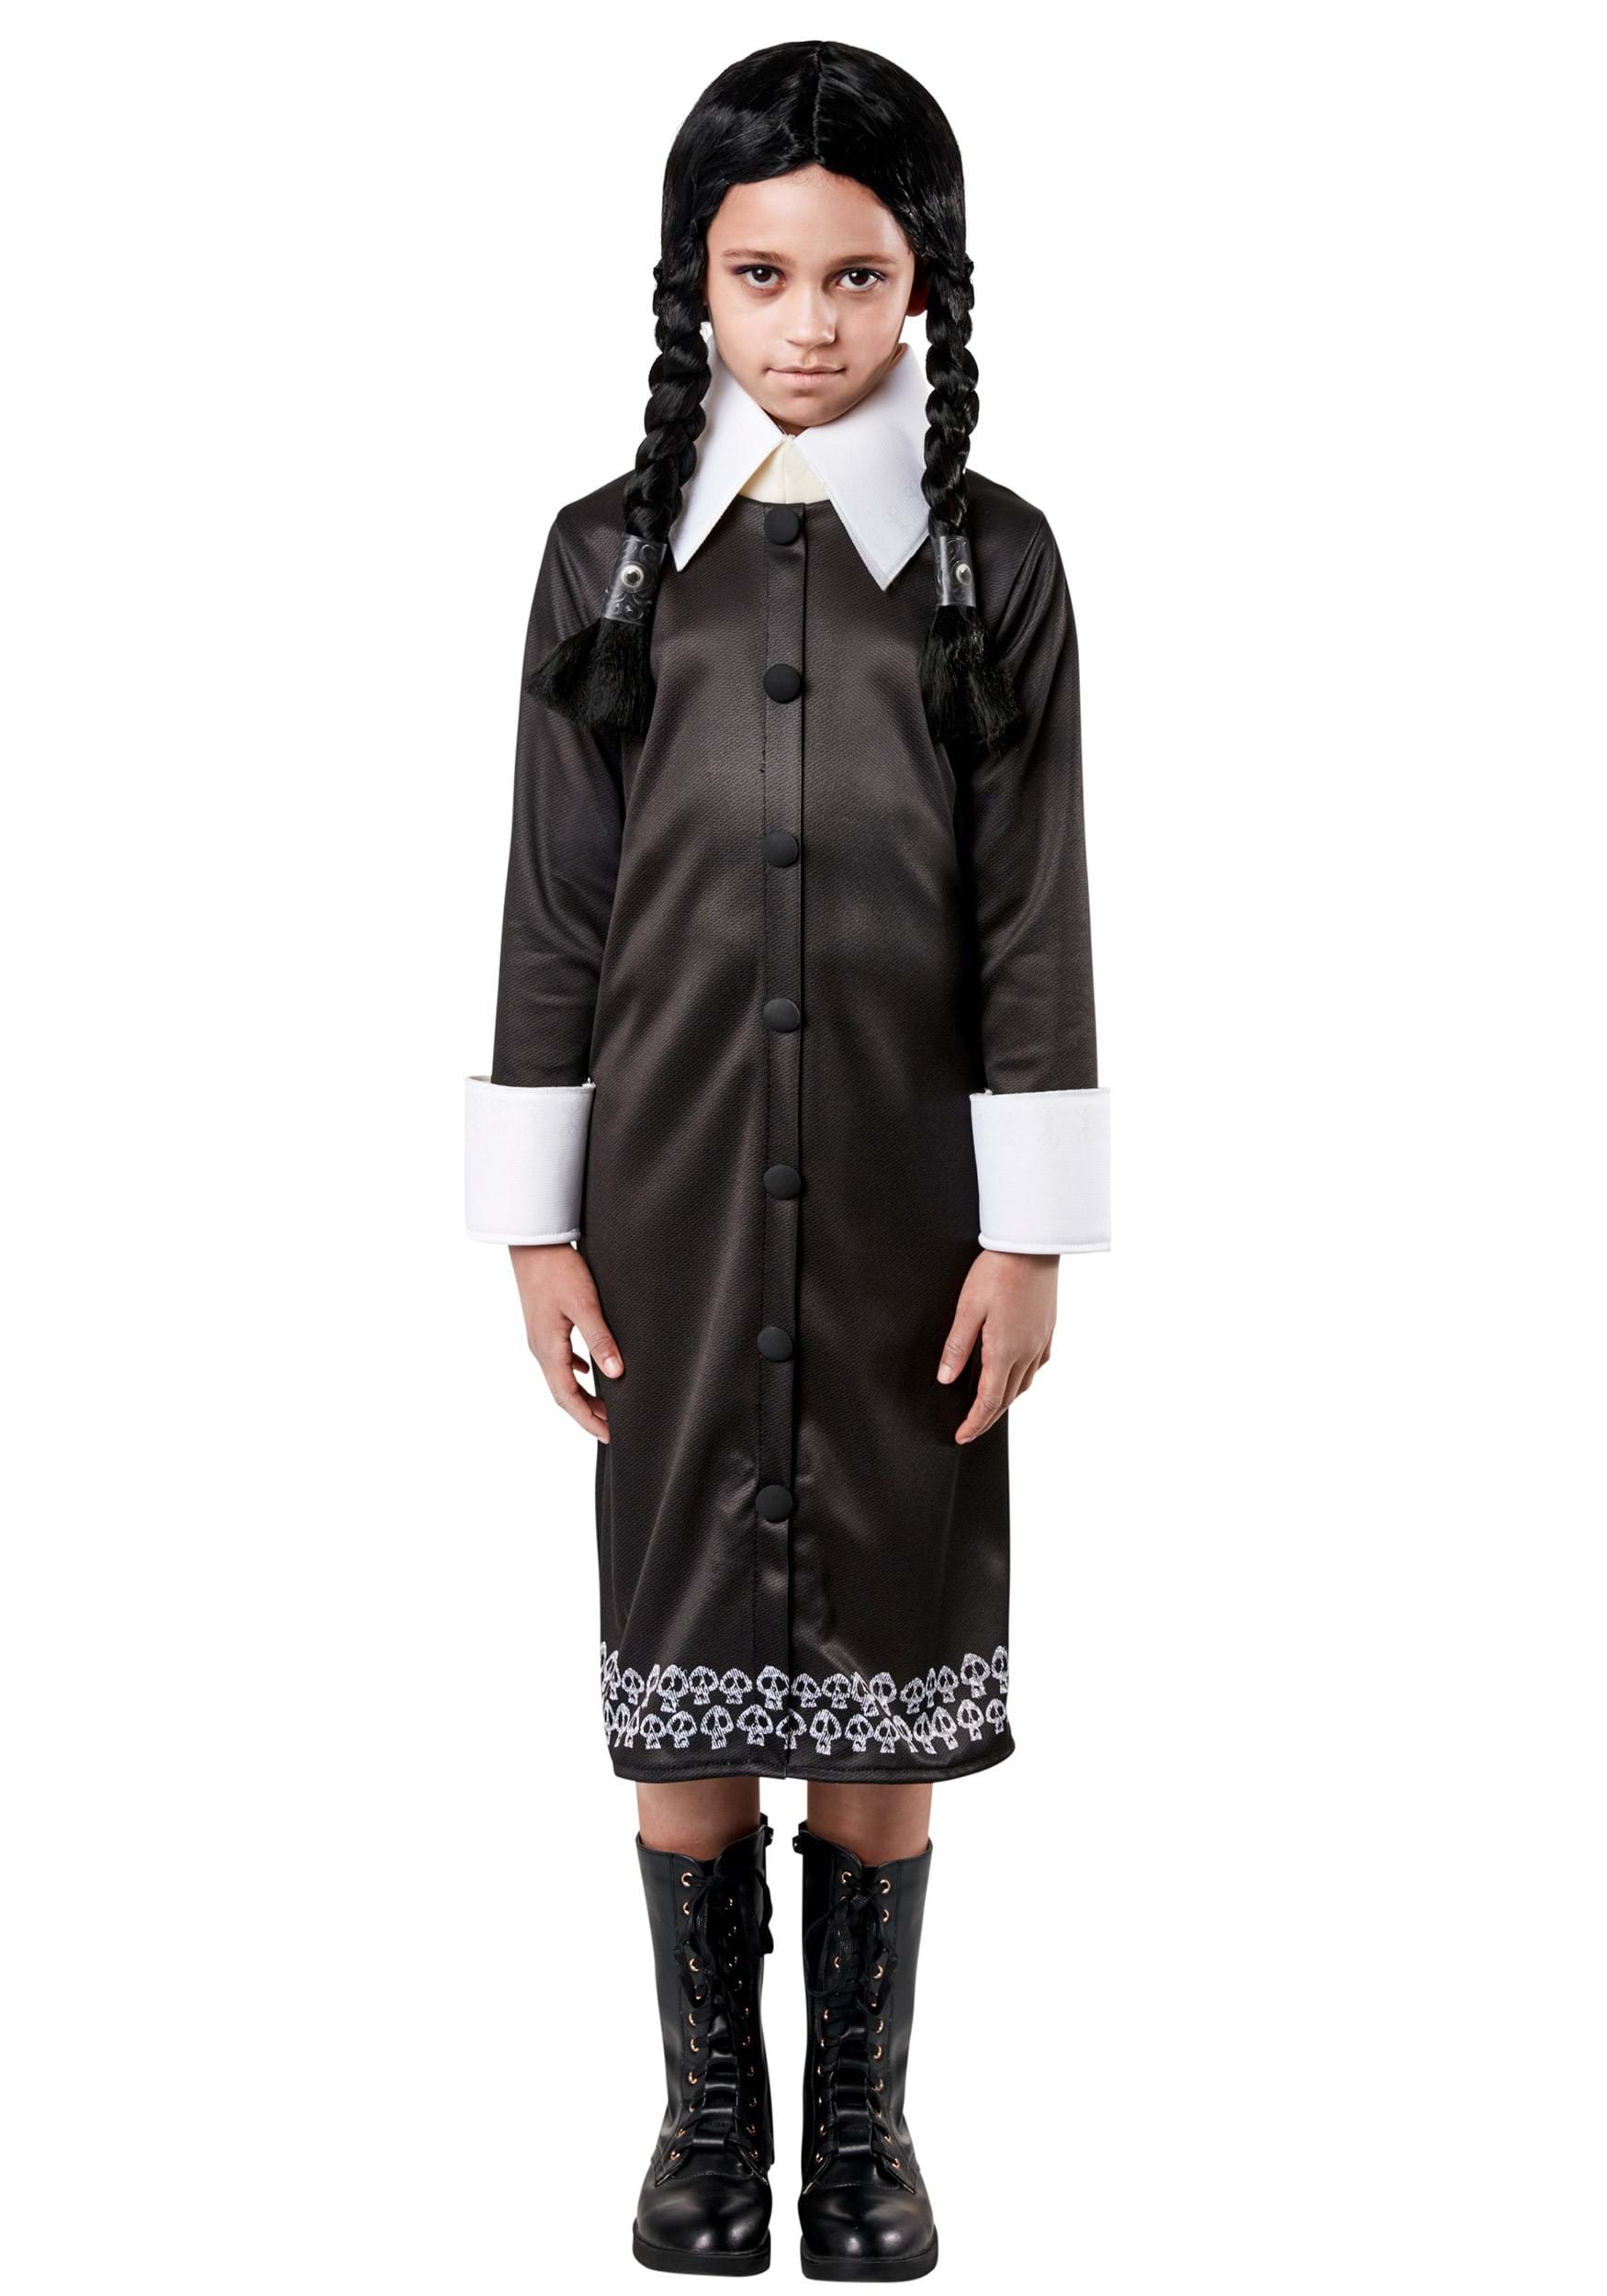 The Addams Family 2 Wednesday Girls Costume